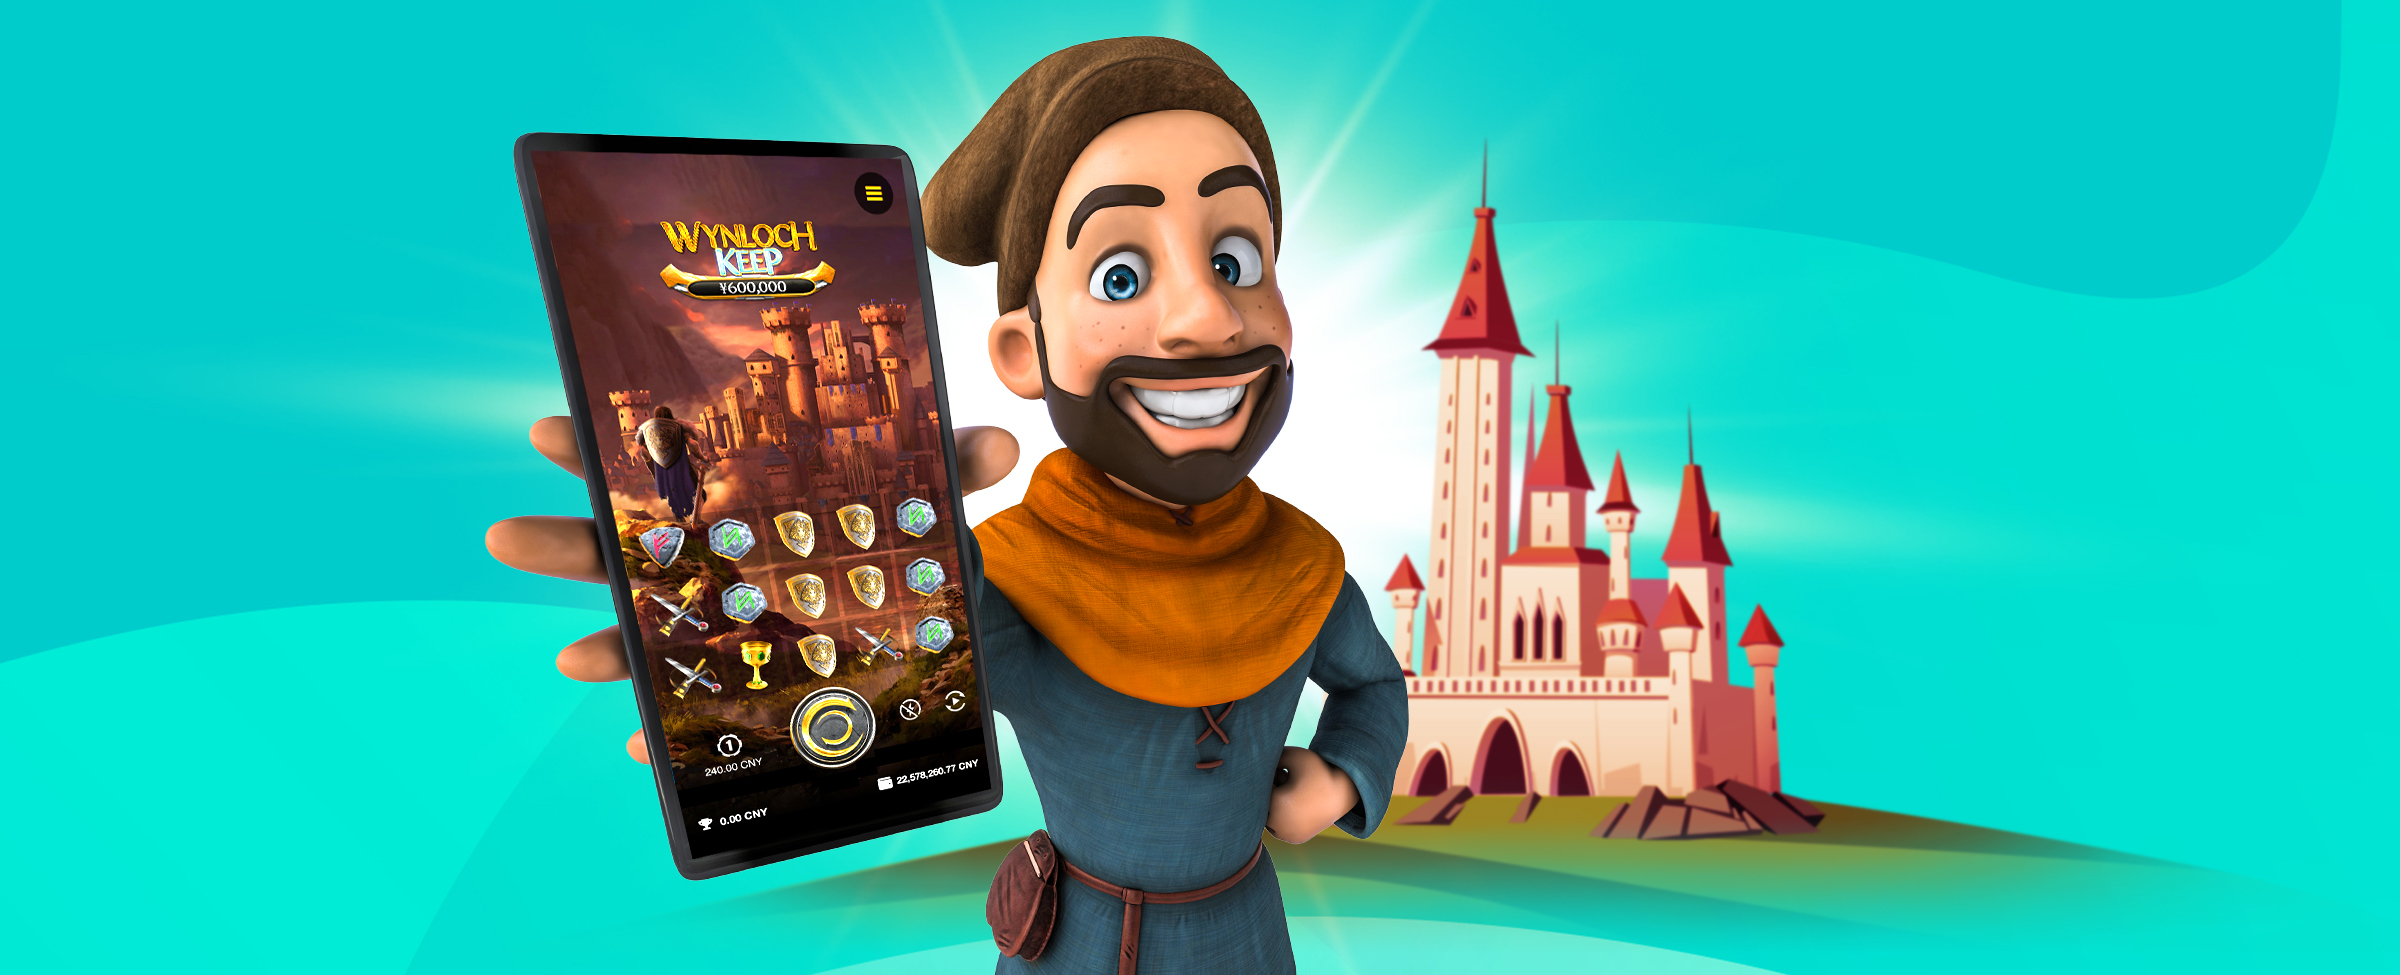 Welcome to our Wynloch Keep game review at SlotsLV. If you’re into fantasy-style slot games, we have one of the best for you to try today. Find out everything you need to know now!